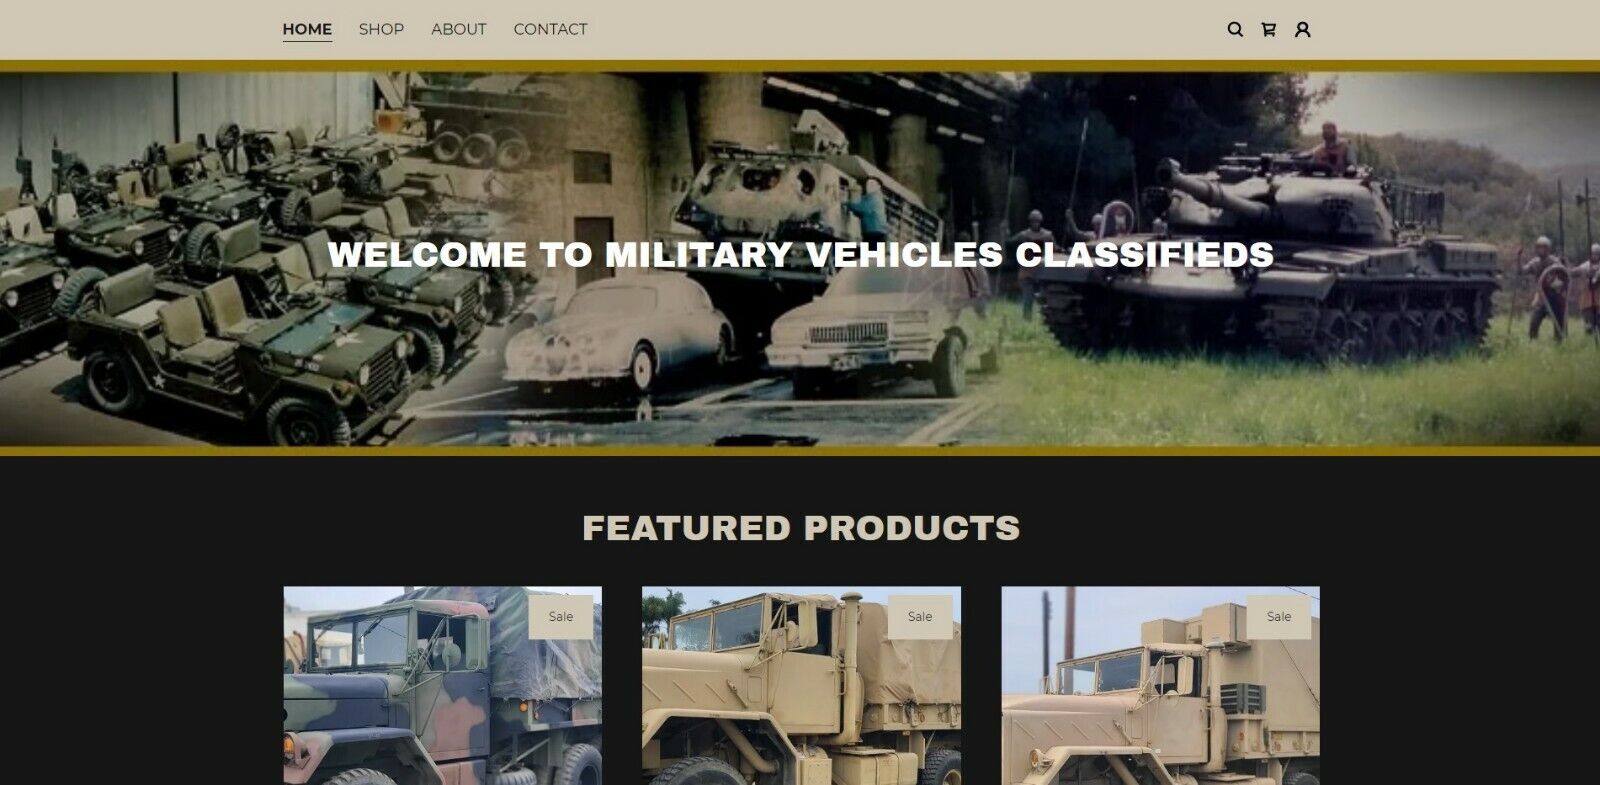 MILITARY VEHICLES CLASSIFIEDS DOMAIN URL WEBSITE FOR SALE BUSINESS MAKE MONEY! Unbranded